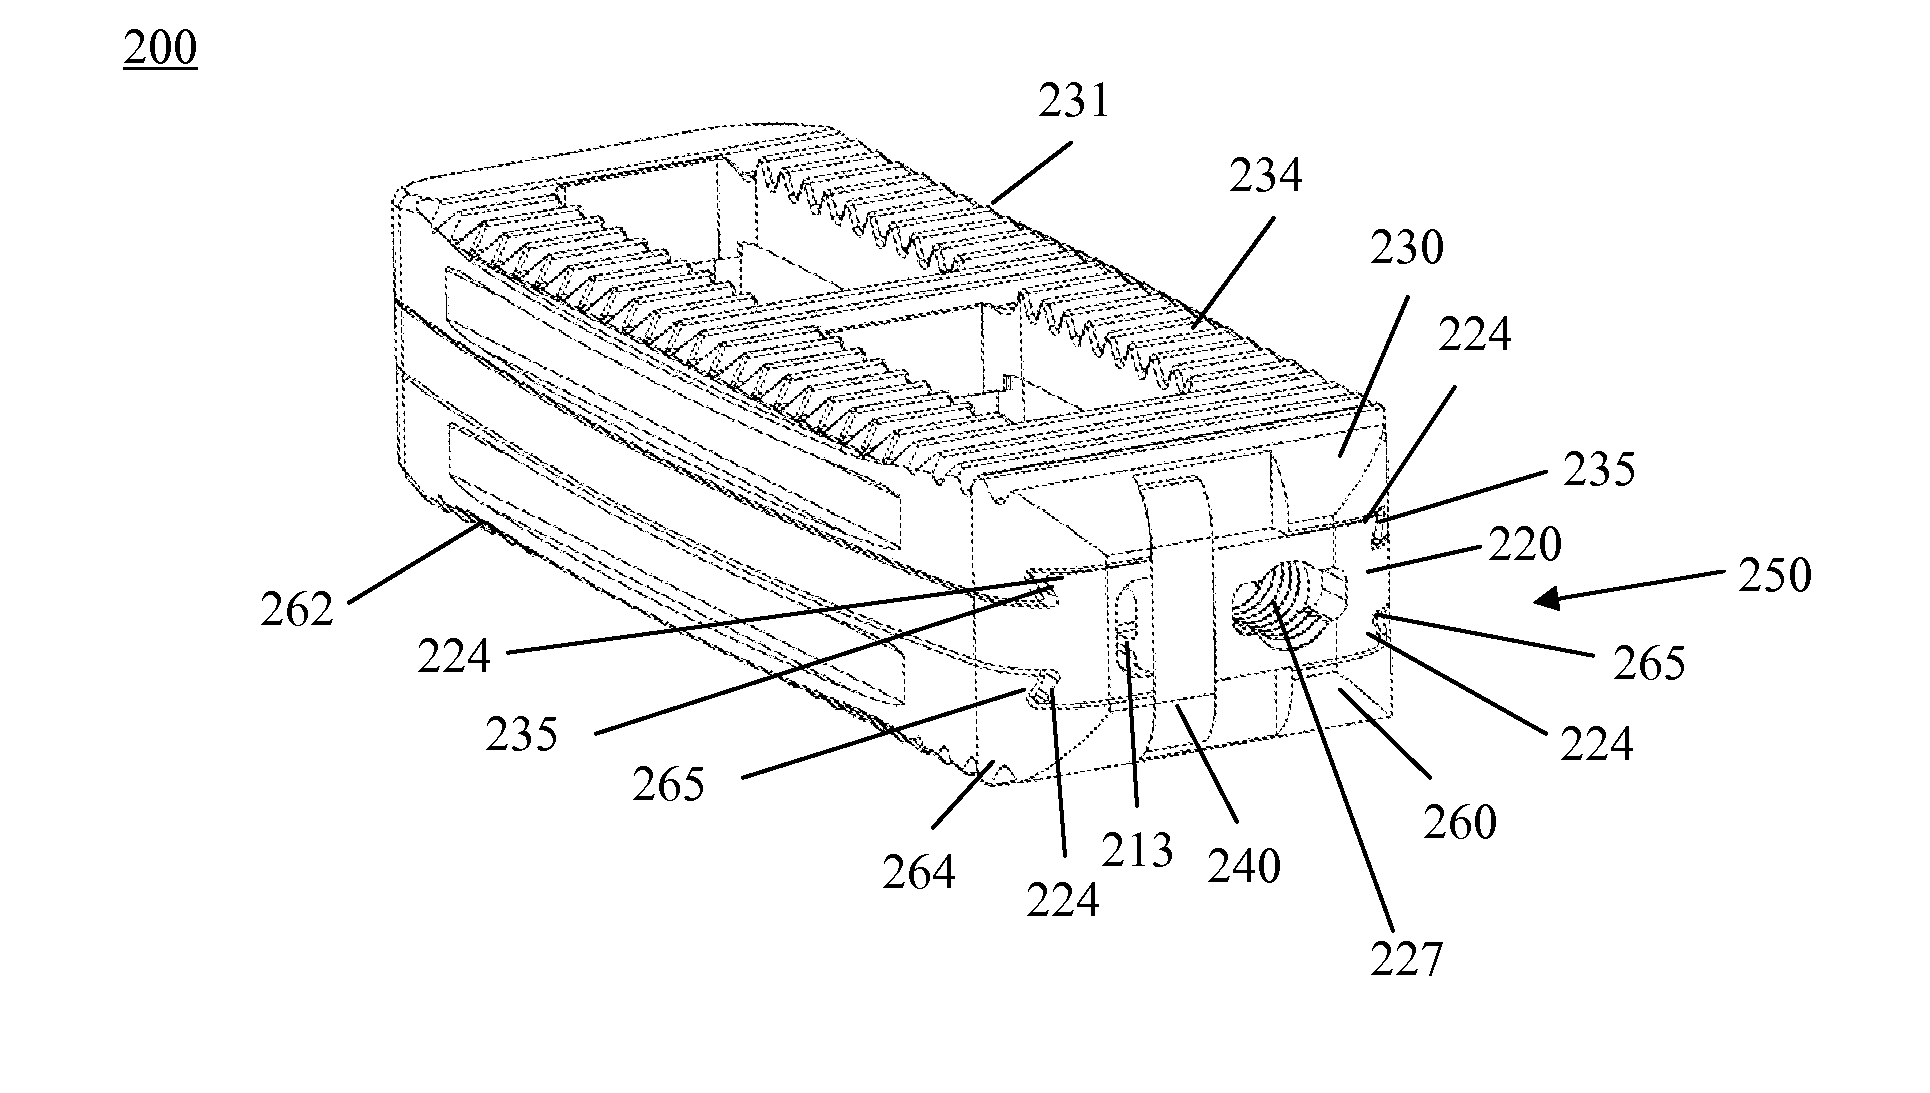 Expandable tissue space implant and method of use